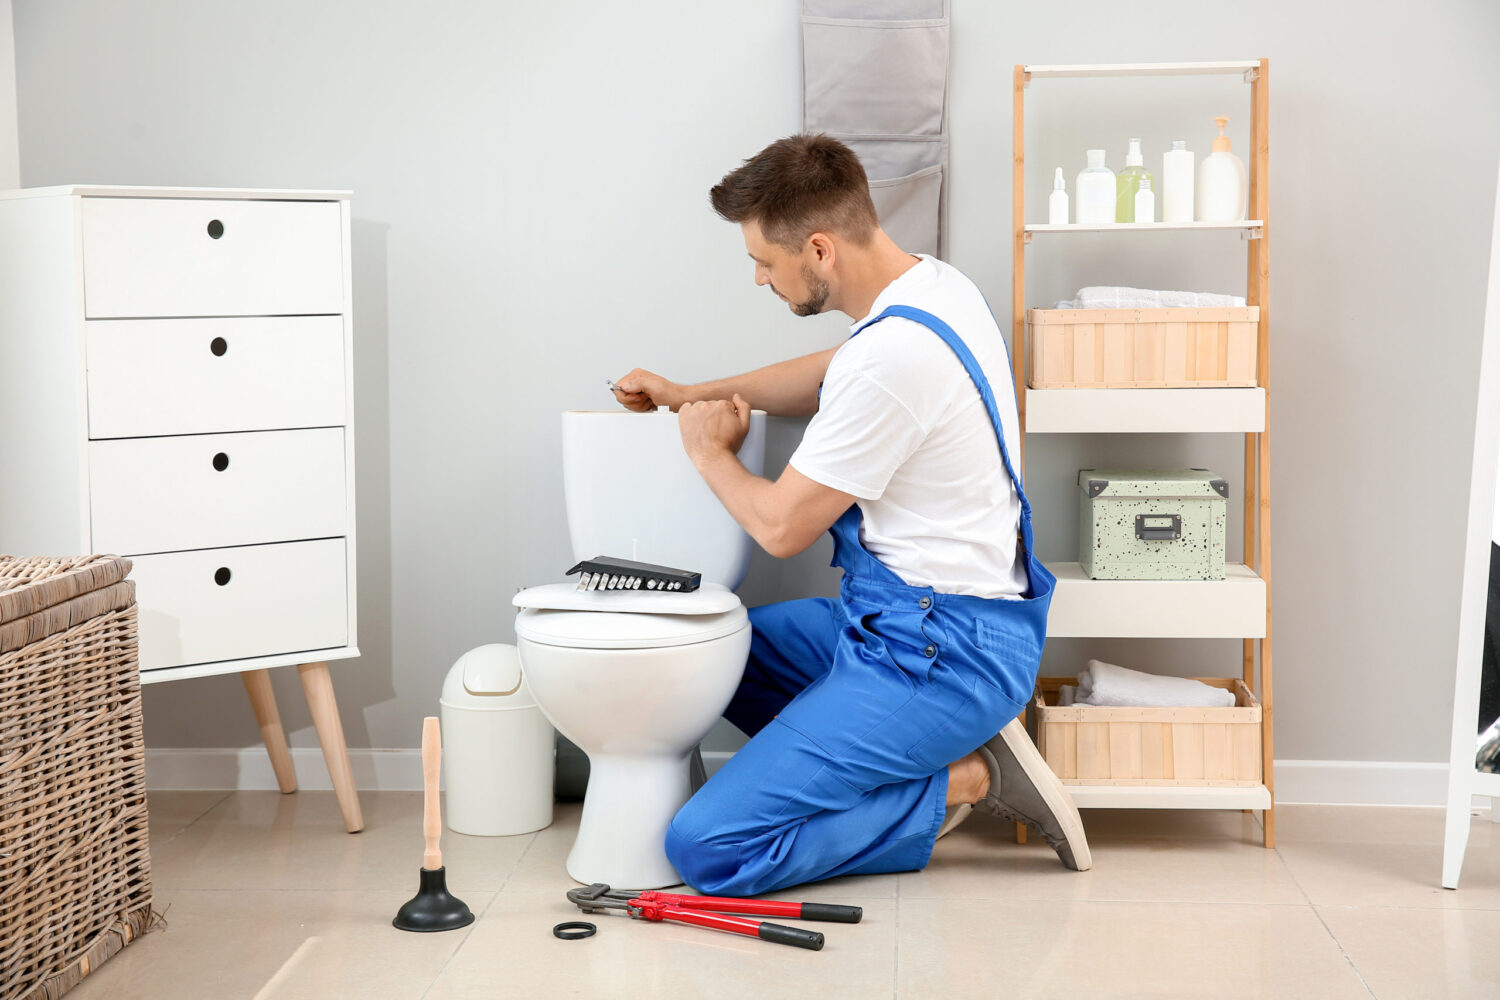 Toilet Plumbing services in San Francisco | CR&P